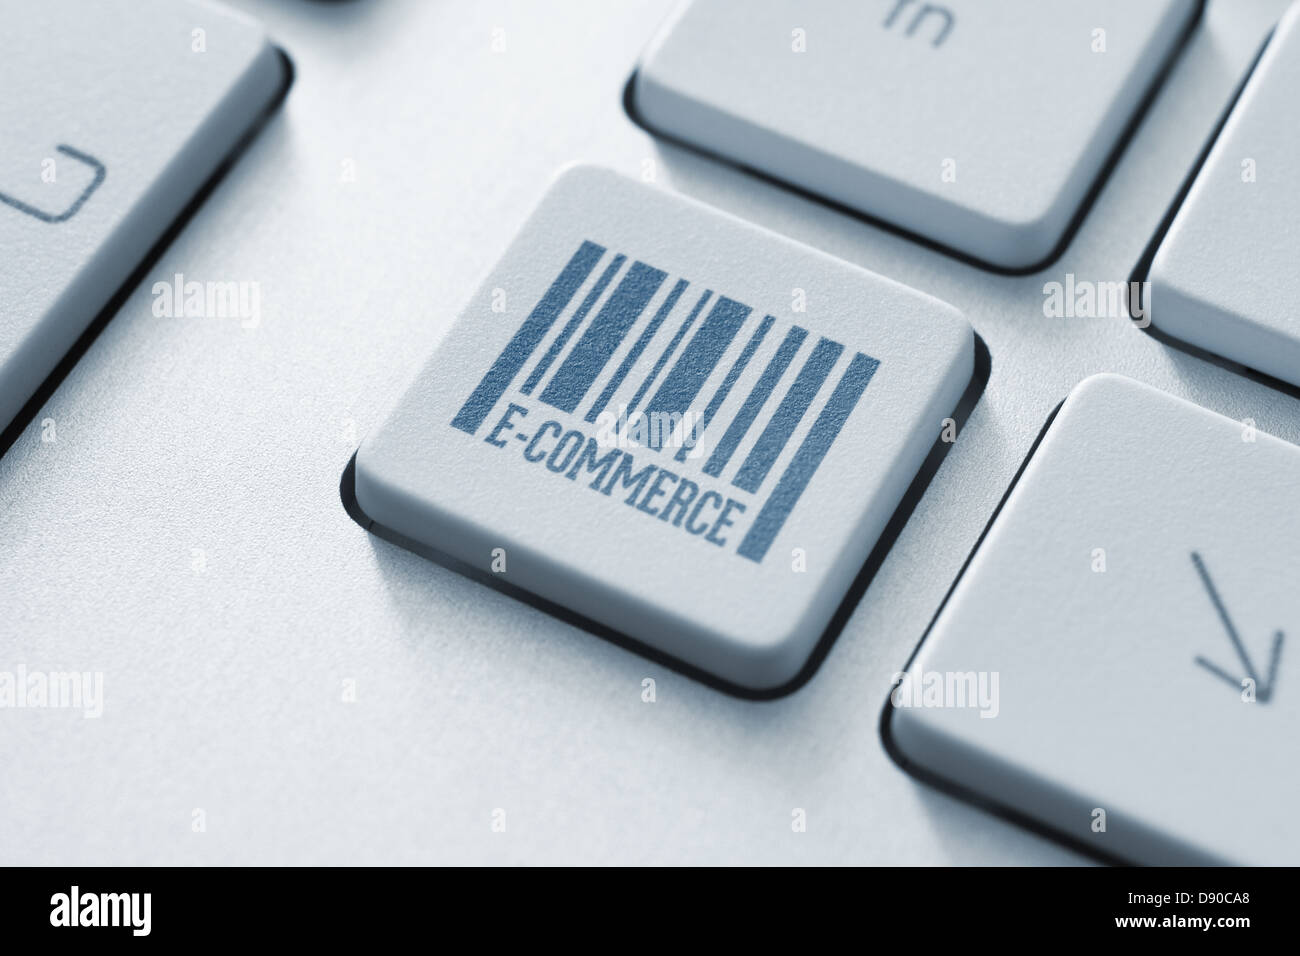 E-commerce button on a modern computer keyboard Stock Photo